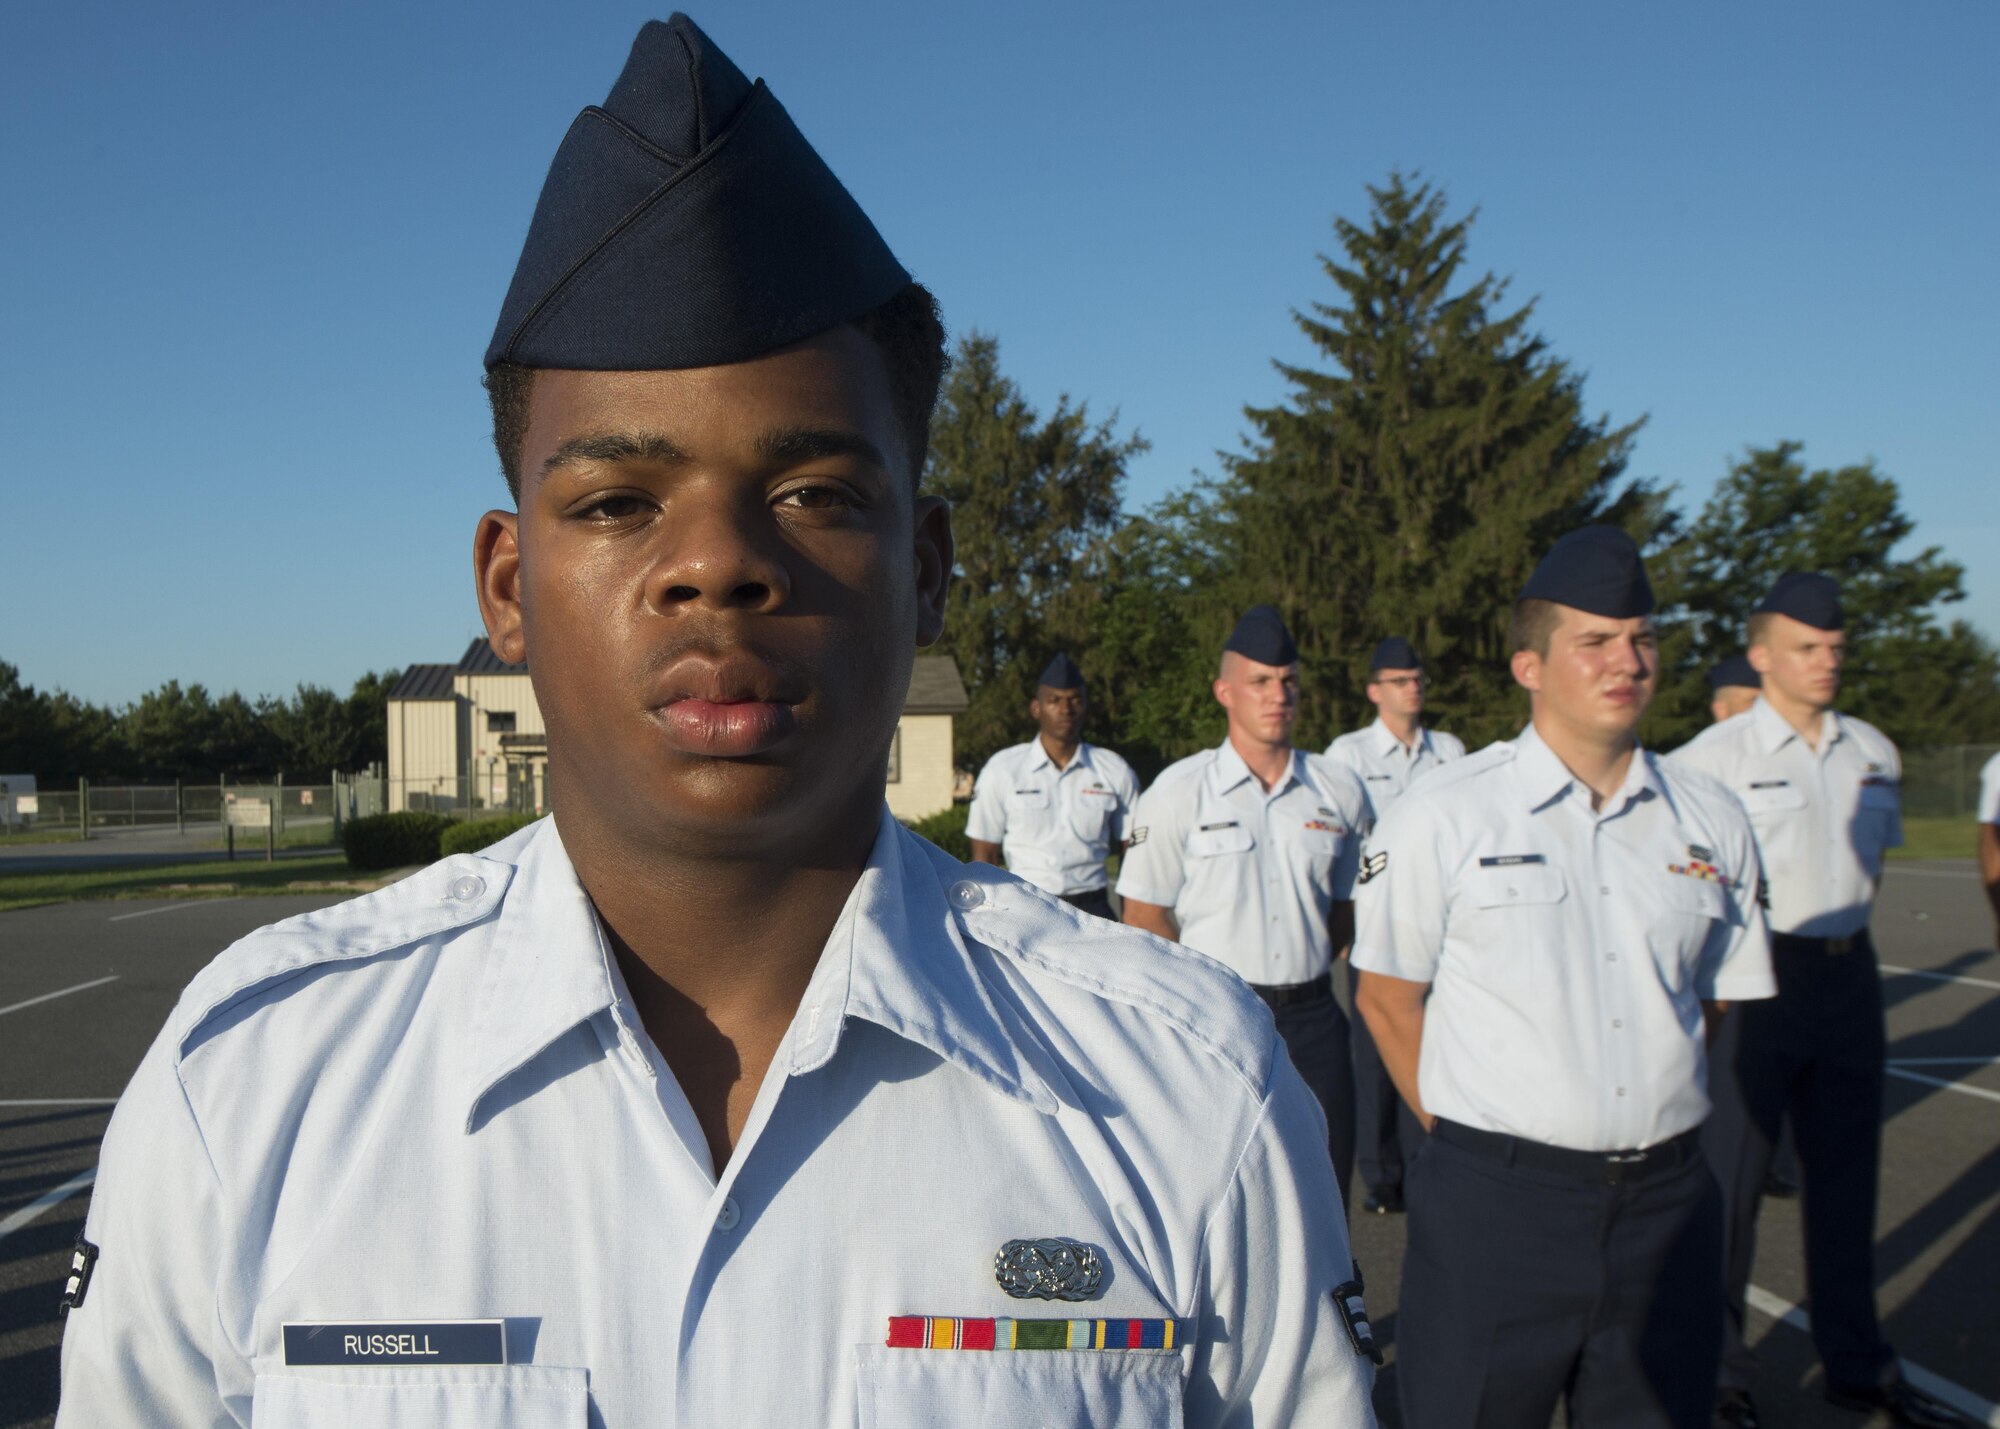 Airman 1st Class Dimitrios Russell, 436th Logistics Readiness Squadron fuels operator, stands at parade rest during an open-ranks inspection Aug. 17, 2016, on Dover Air Force Base, Del. The 436th LRS plans for emergency response deployments, combat support capability, and base and expeditionary support. (U.S. Air Force photo/Senior Airman Zachary Cacicia)